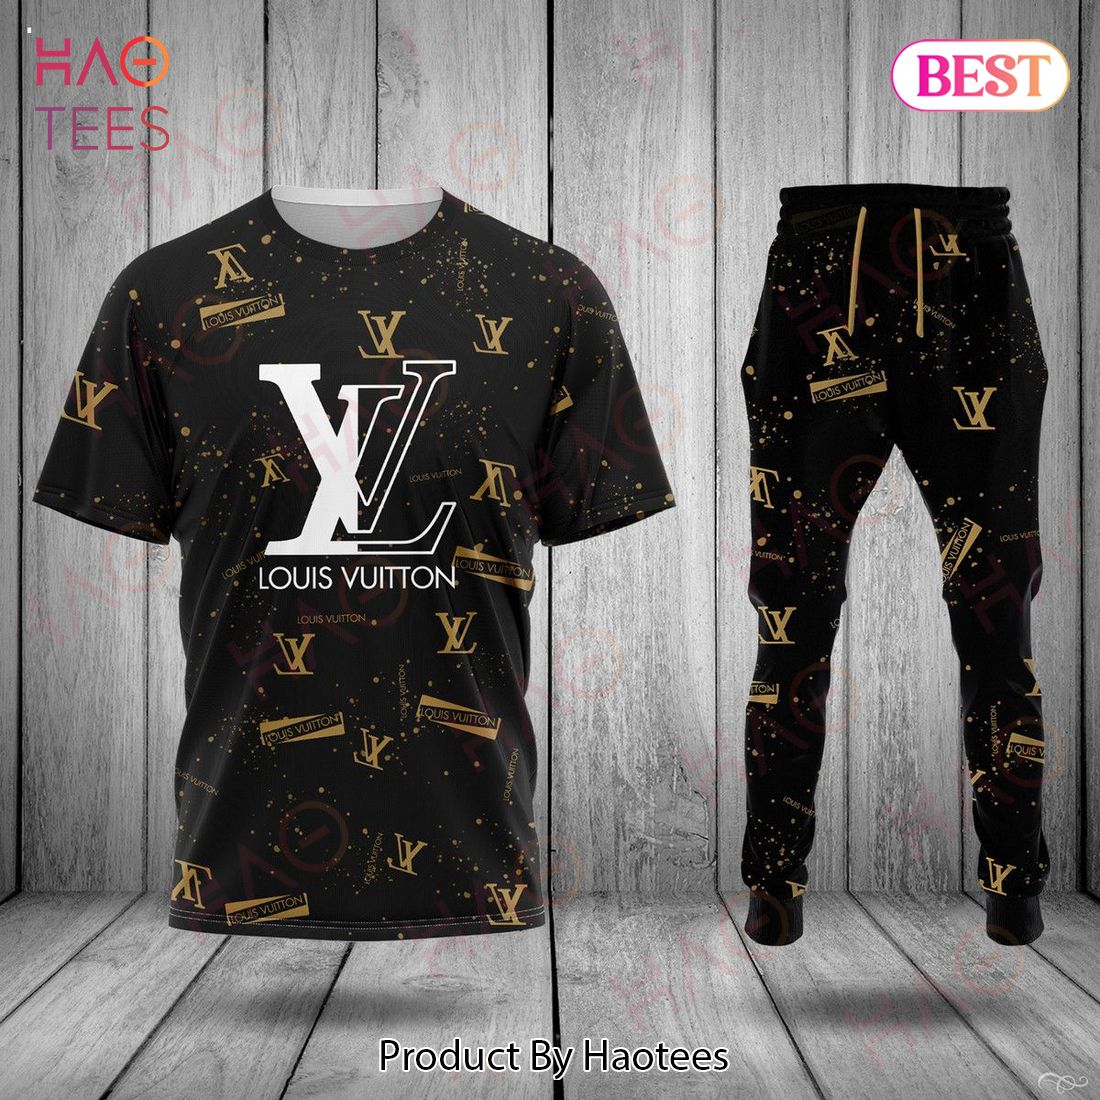 Louis Vuitton Black Mix Logo Luxury Brand T-Shirt And Pants Limited Edition